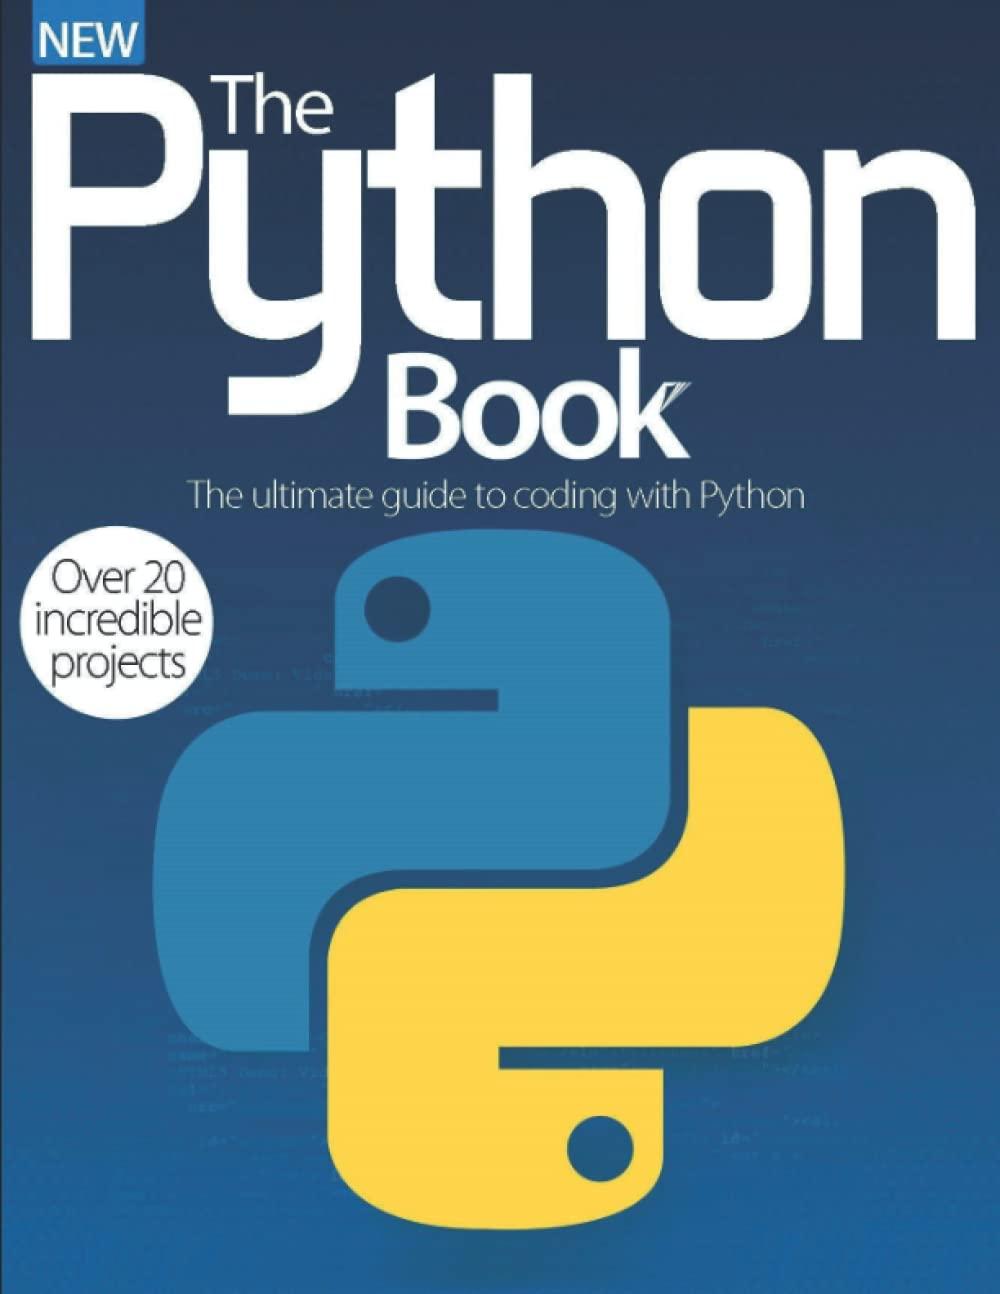 python book the ultimate guide to coding 1st edition imagine publishing b09phf7stb, 979-8793574297